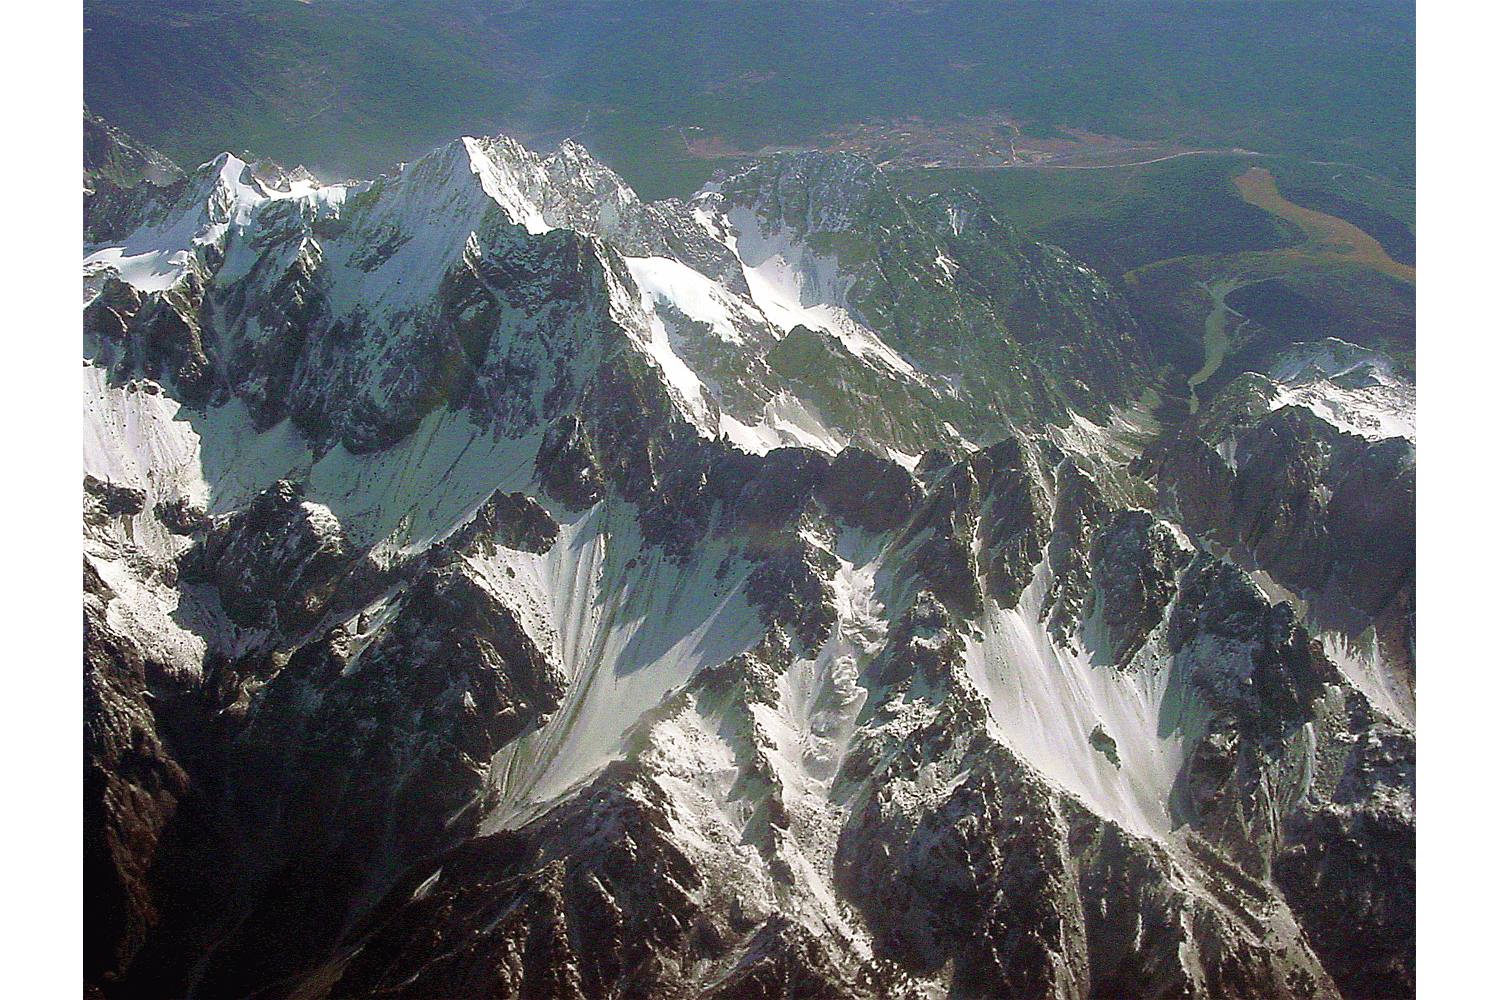 Retreating glaciers on Jade Dragon Snow Mountain in Yunnan province, on the eastern edge of the Tibetan plateau. Photo by Yang Yong.